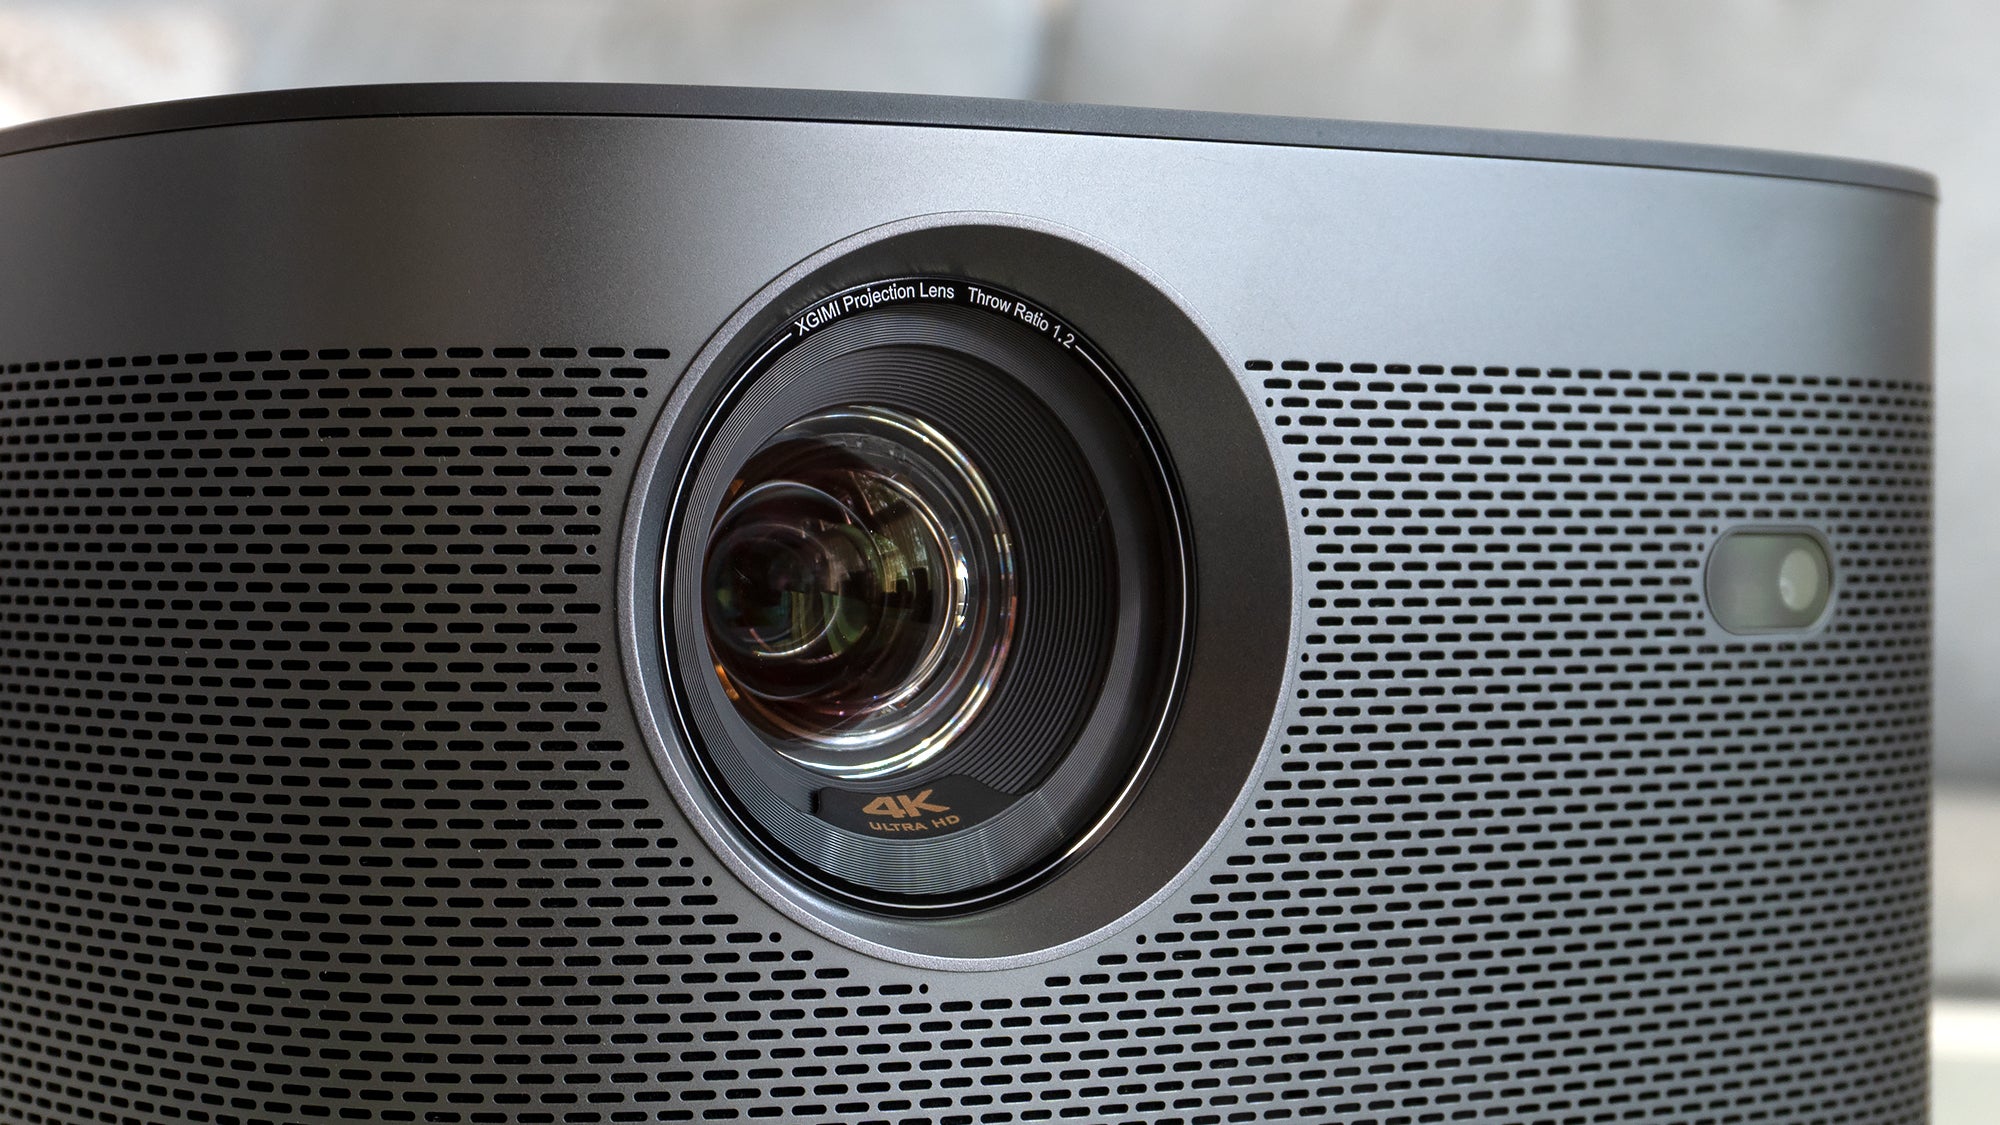 Are lens caps no longer a thing with projectors? It would have been a nice inclusion given how portable the Horizon Pro is. (Photo: Andrew Liszewski/Gizmodo)